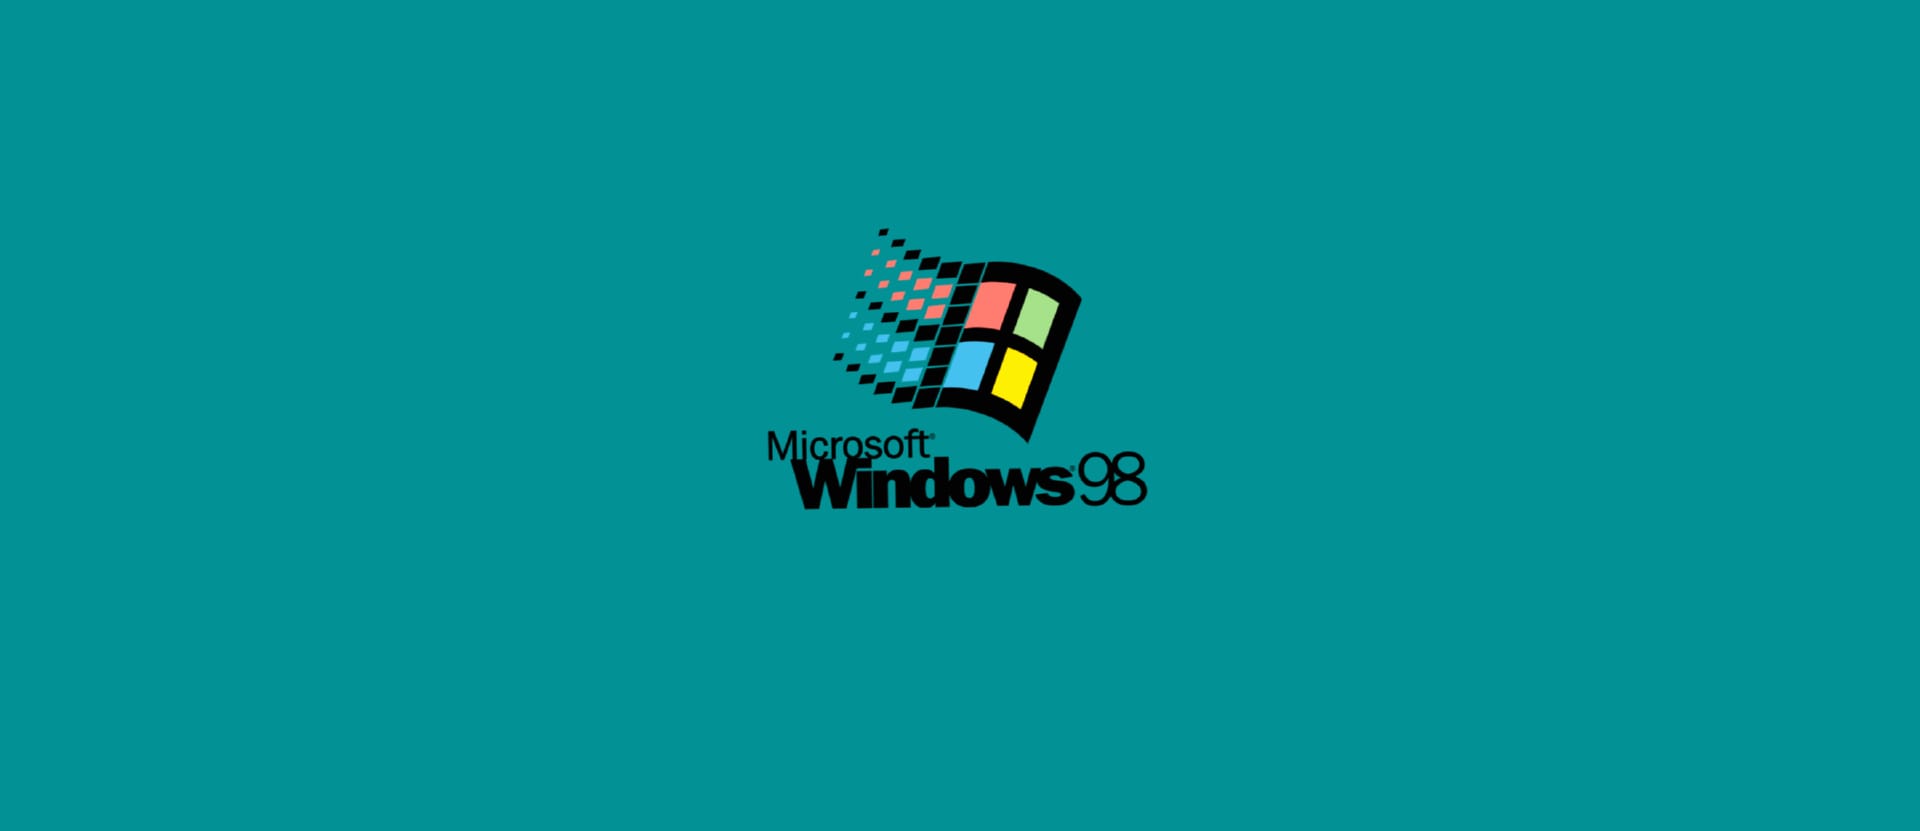 Windows 98 wallpapers HD quality